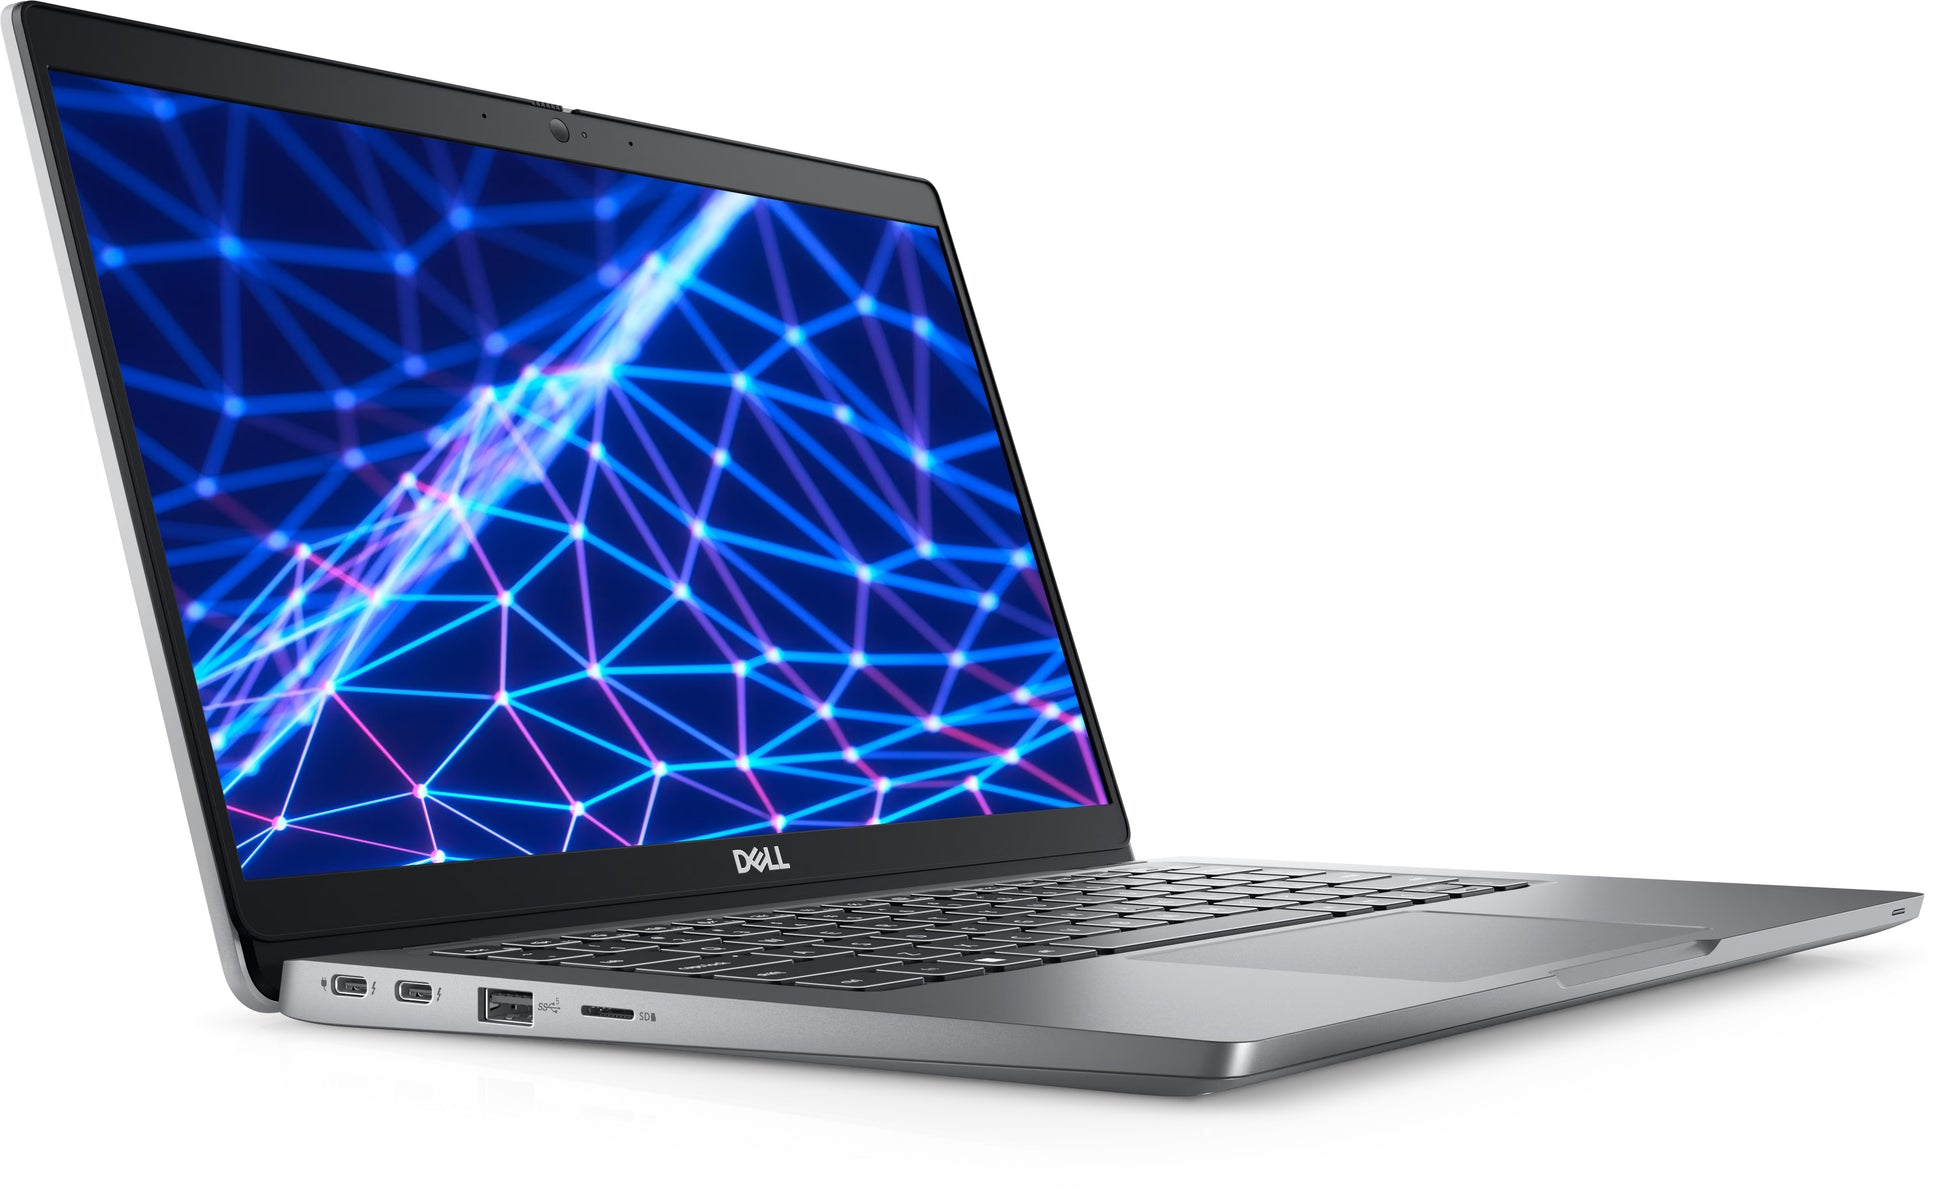 63JC6 DELL LATITUDE 5330 2-IN-1 BUSINESS LAPTOP INTEL:I5-1245U/10-CORE 16GB 256GB/PCIE 802.11AX+BT BL SCR NO-NFC WEBCAM/HD INTEL-IRIS-XE/IGP 13.3FHD/300NITS/TOUCH W11P 3-CELL ALUMINUM 2.91LBS 1YR BASIC ONSITE 884116460428